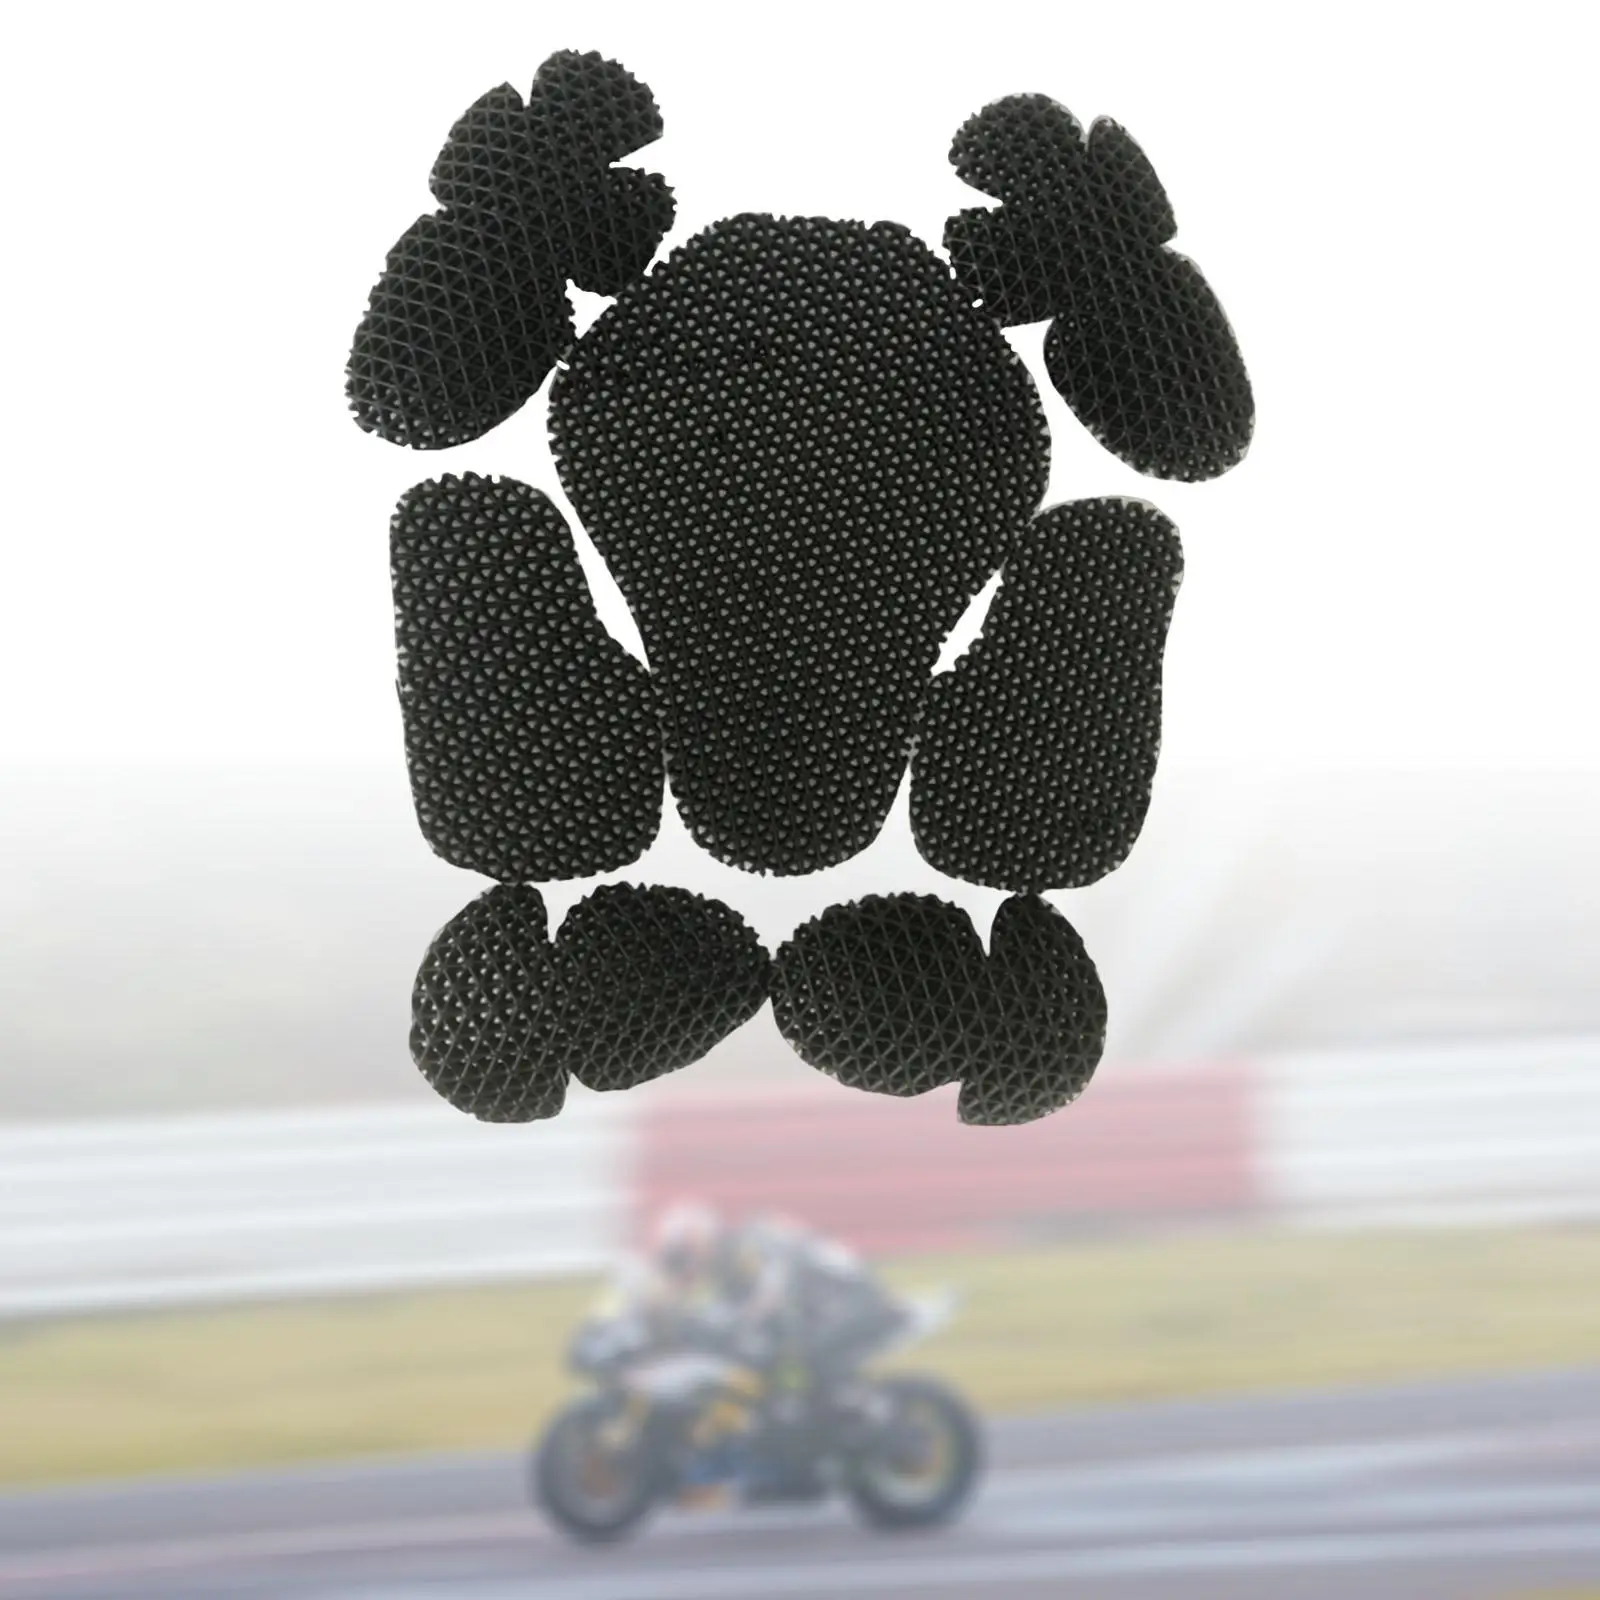 5 Pieces Protector Pads Knee Accessories Protection  Motocross Unisex